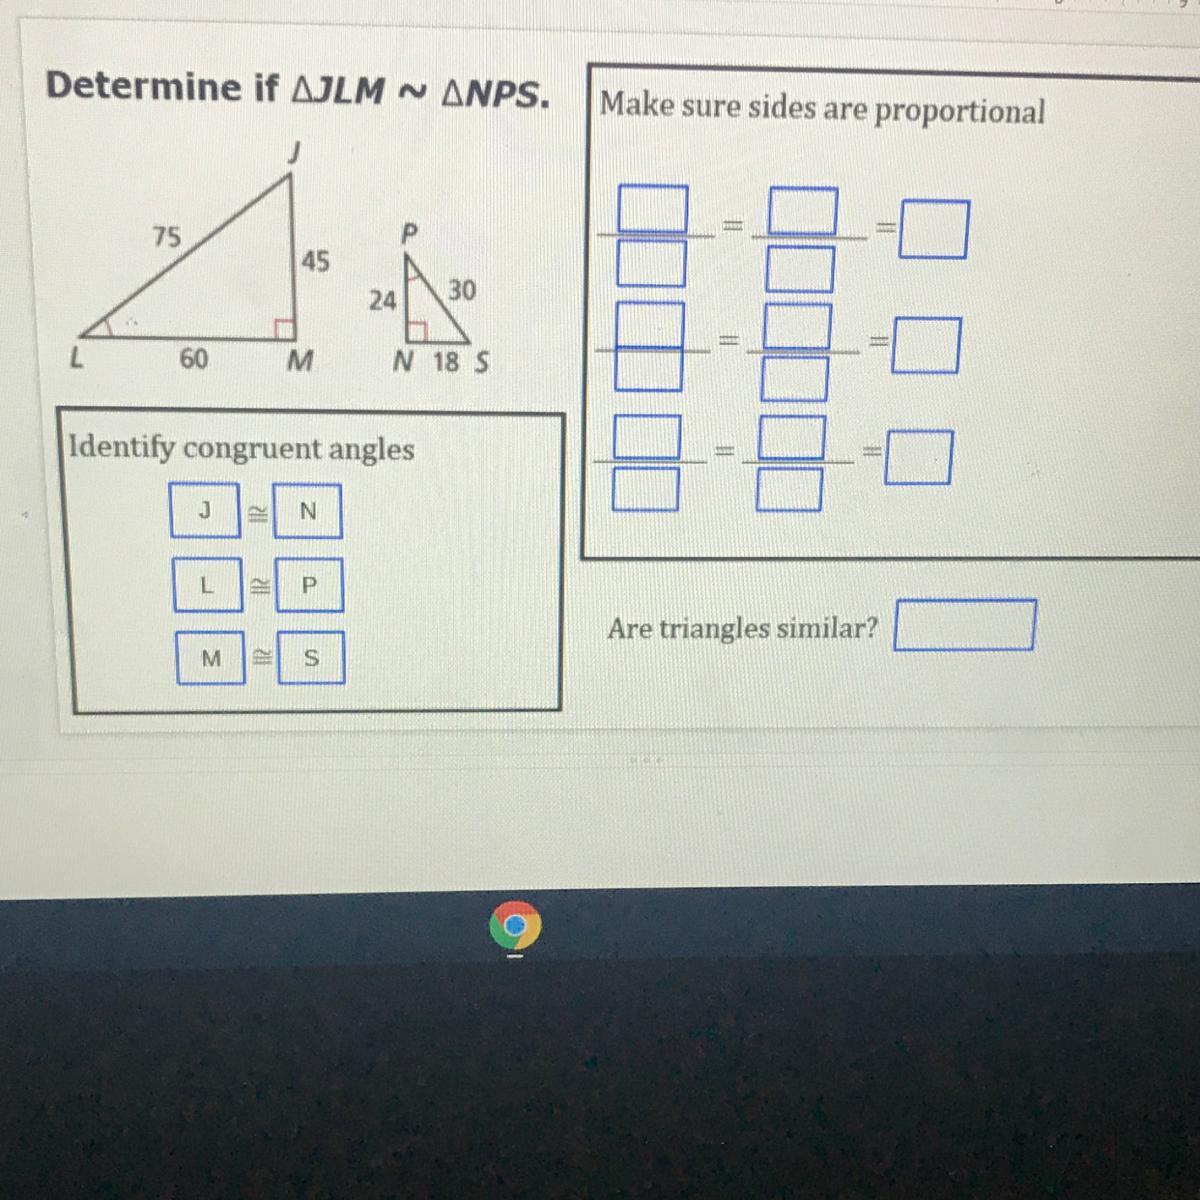 I Need Help With This Please!!